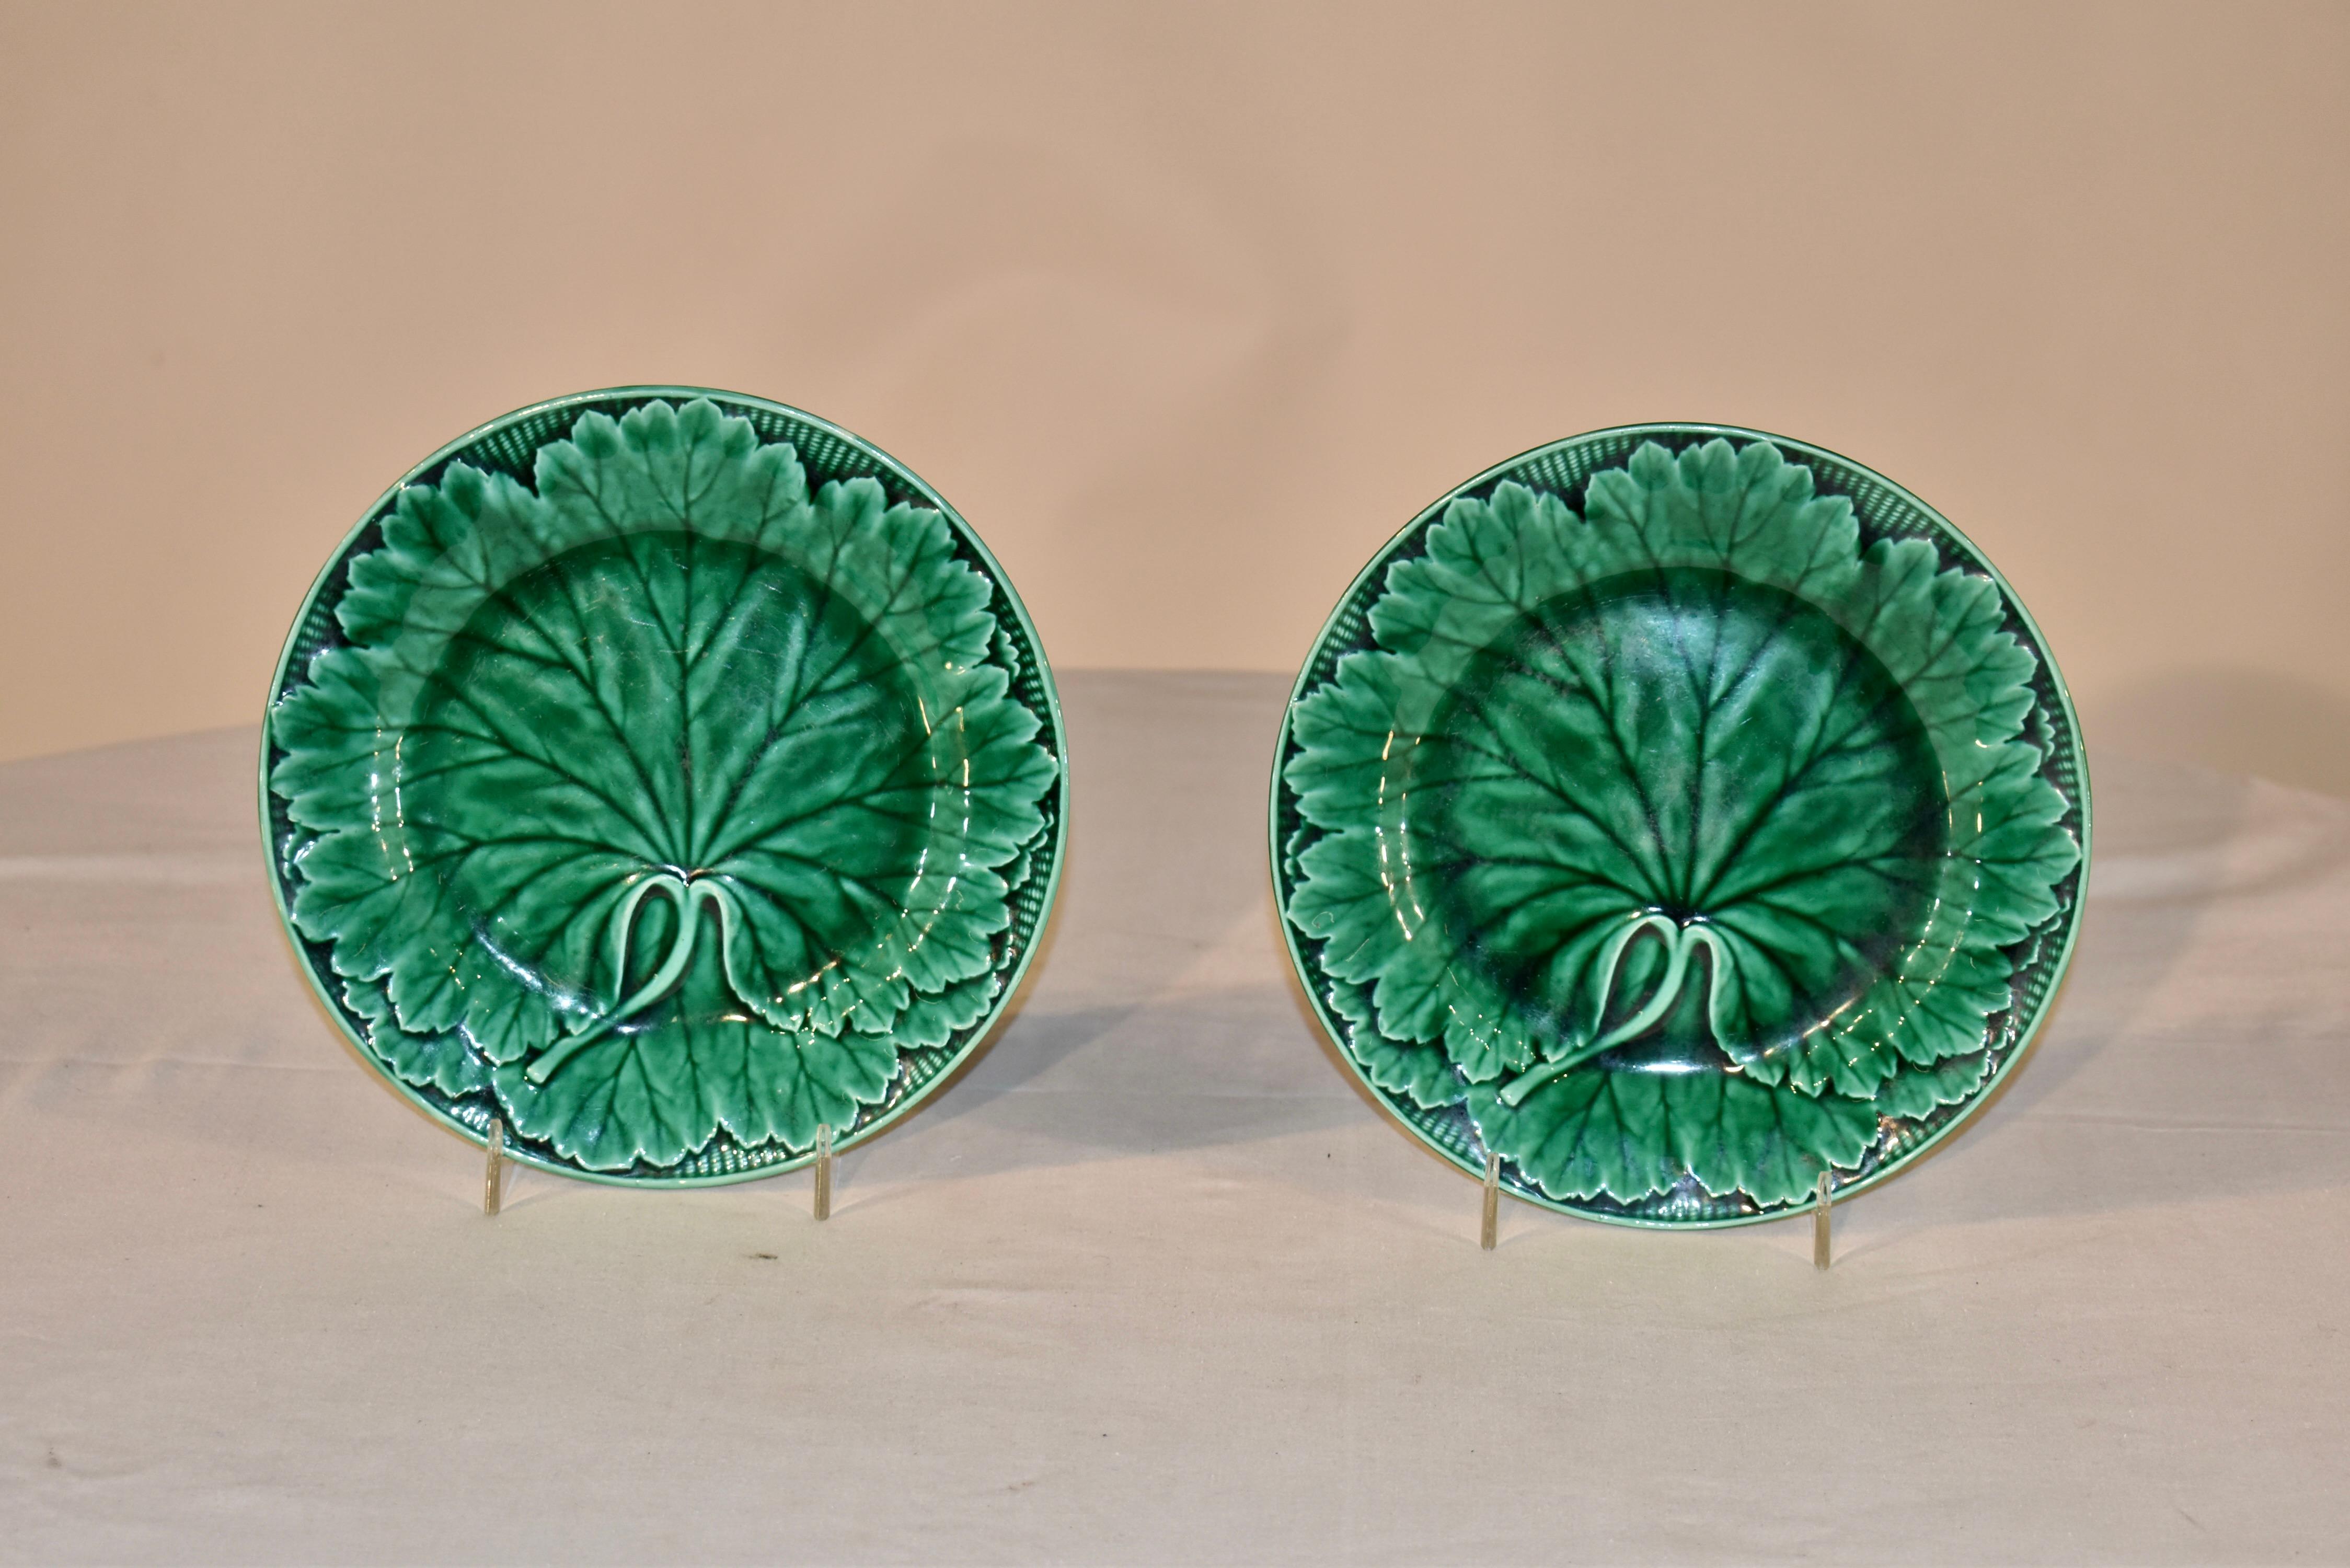 Pair of 19th century Wedgwood Majolica plates with a woven basket and leaf pattern. The basket pattern is around the border of the plate, and the central design is of large leaf with a prominent stem at the base of the leaf. They are simple and